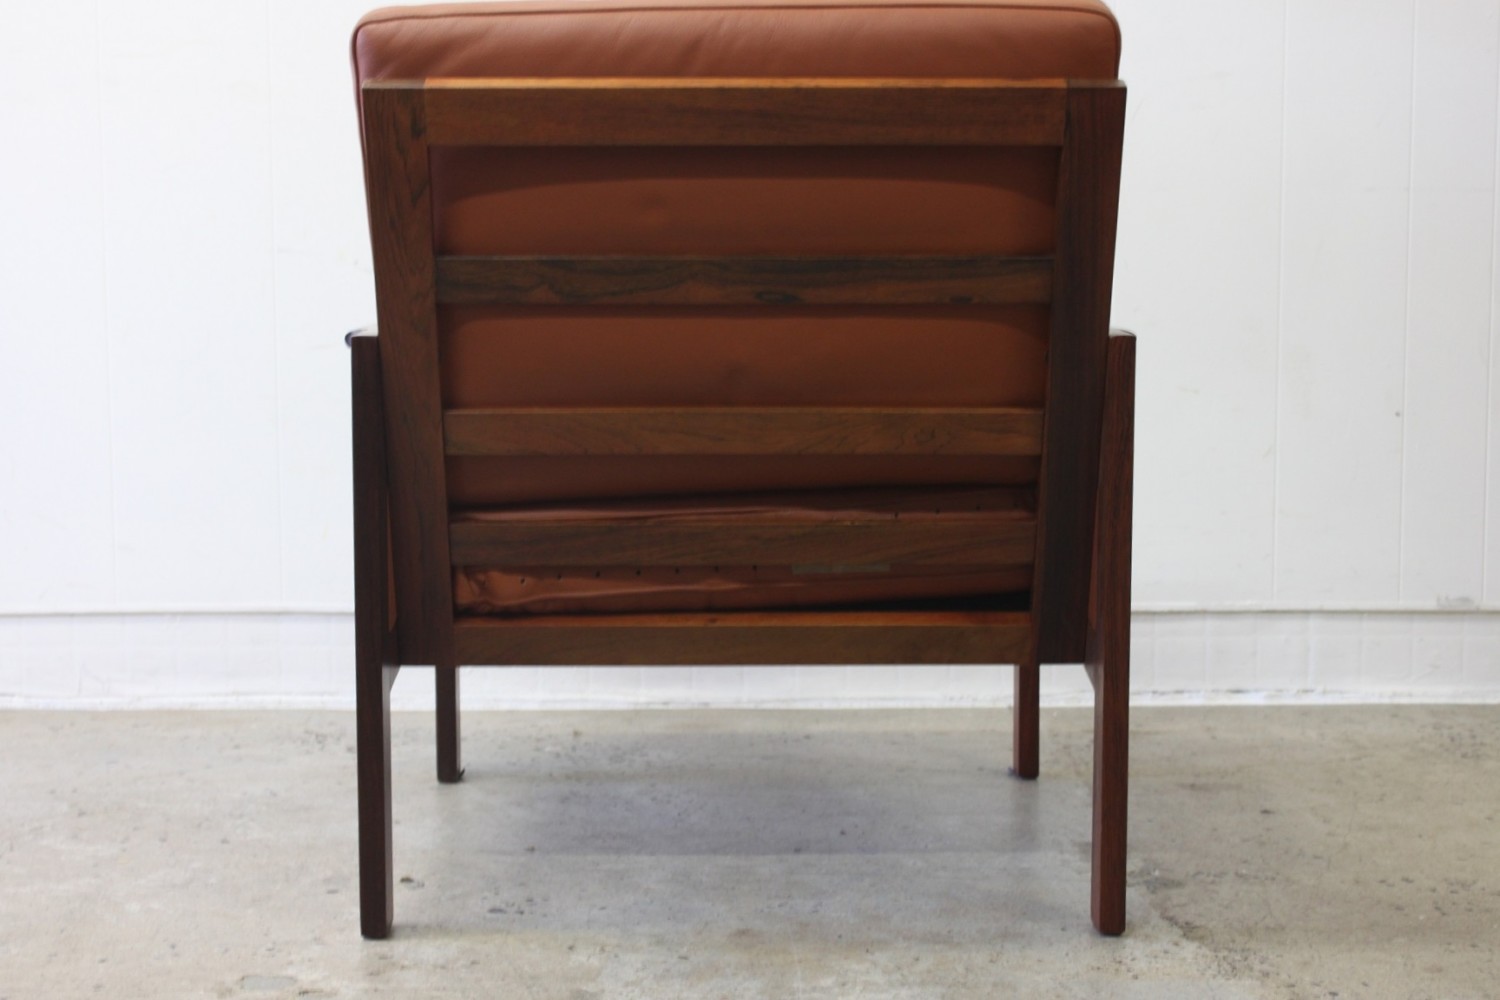 Tan Leather Arm Chairs by Illum WikkelsØ